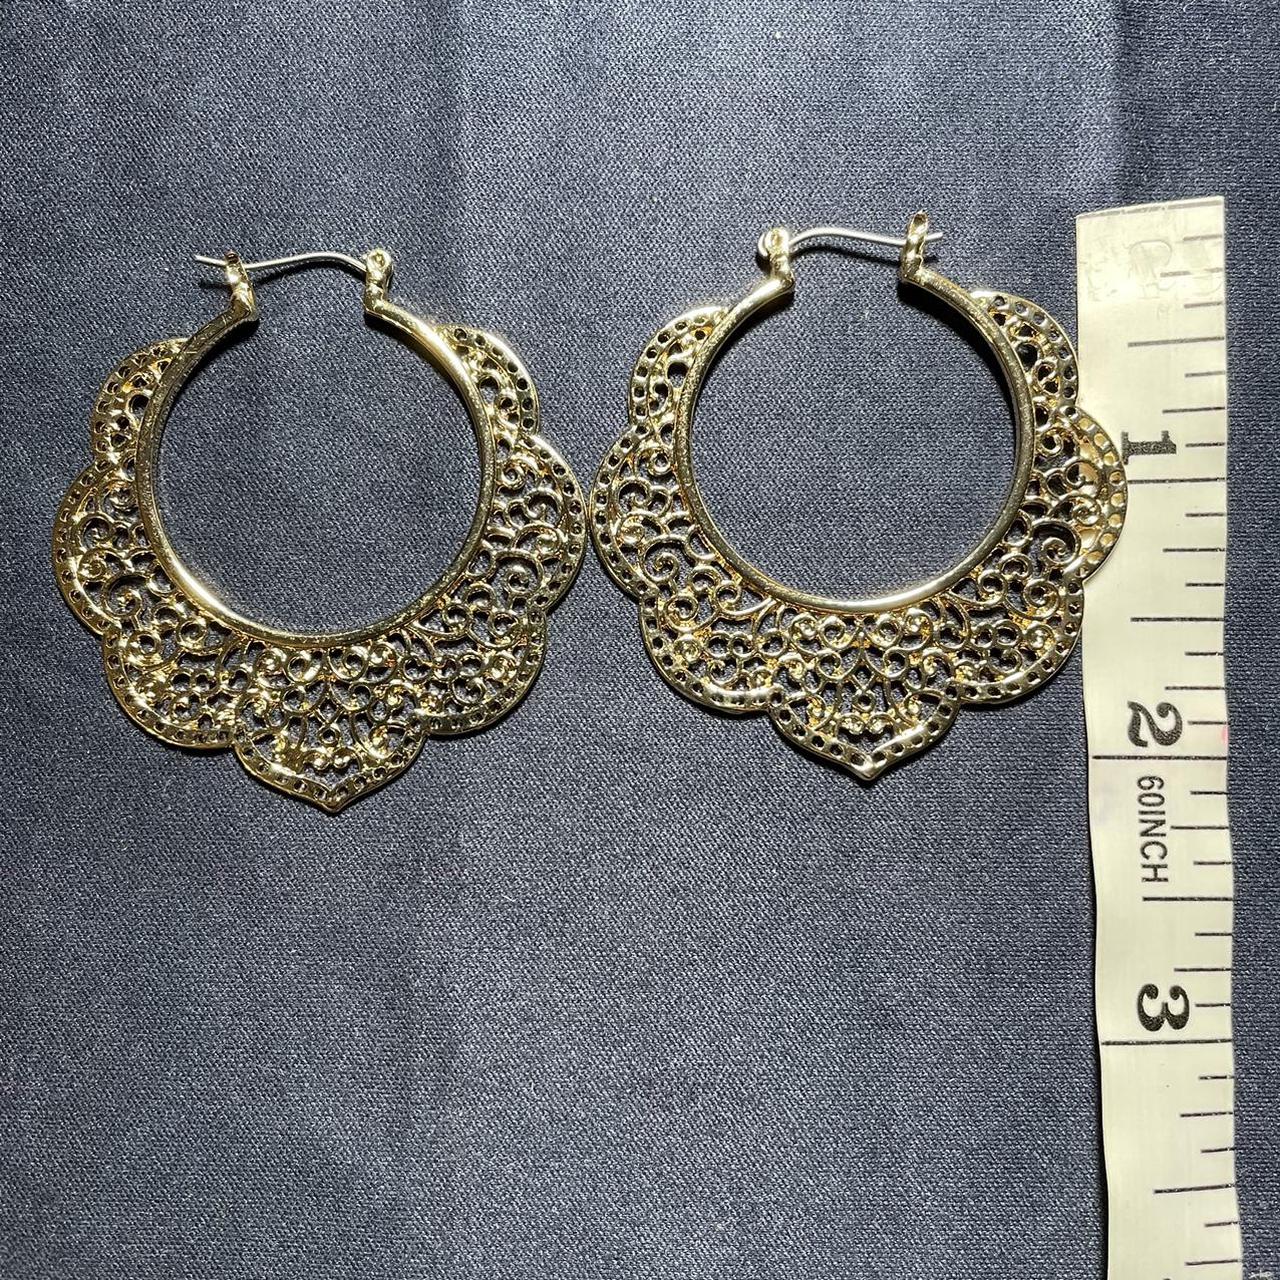 Gold tone hoop earrings. See photos for size. #gold - Depop